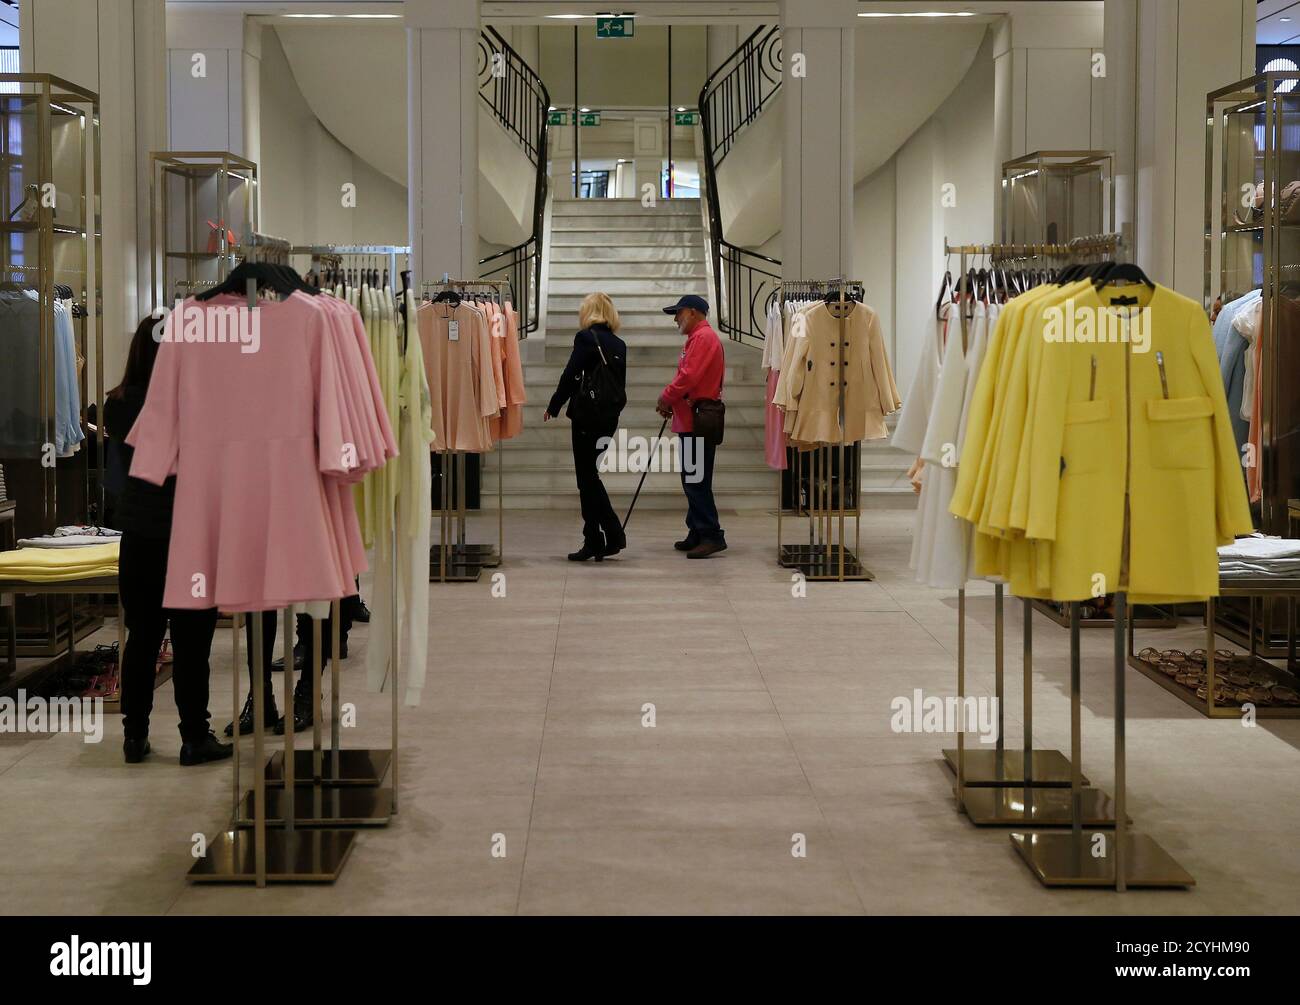 People walk inside a Zara store in central Madrid March 18, 2014. Inditex,  the world's biggest fashion retailer, will accelerate investment in 2014 to  open more new stores after results last year